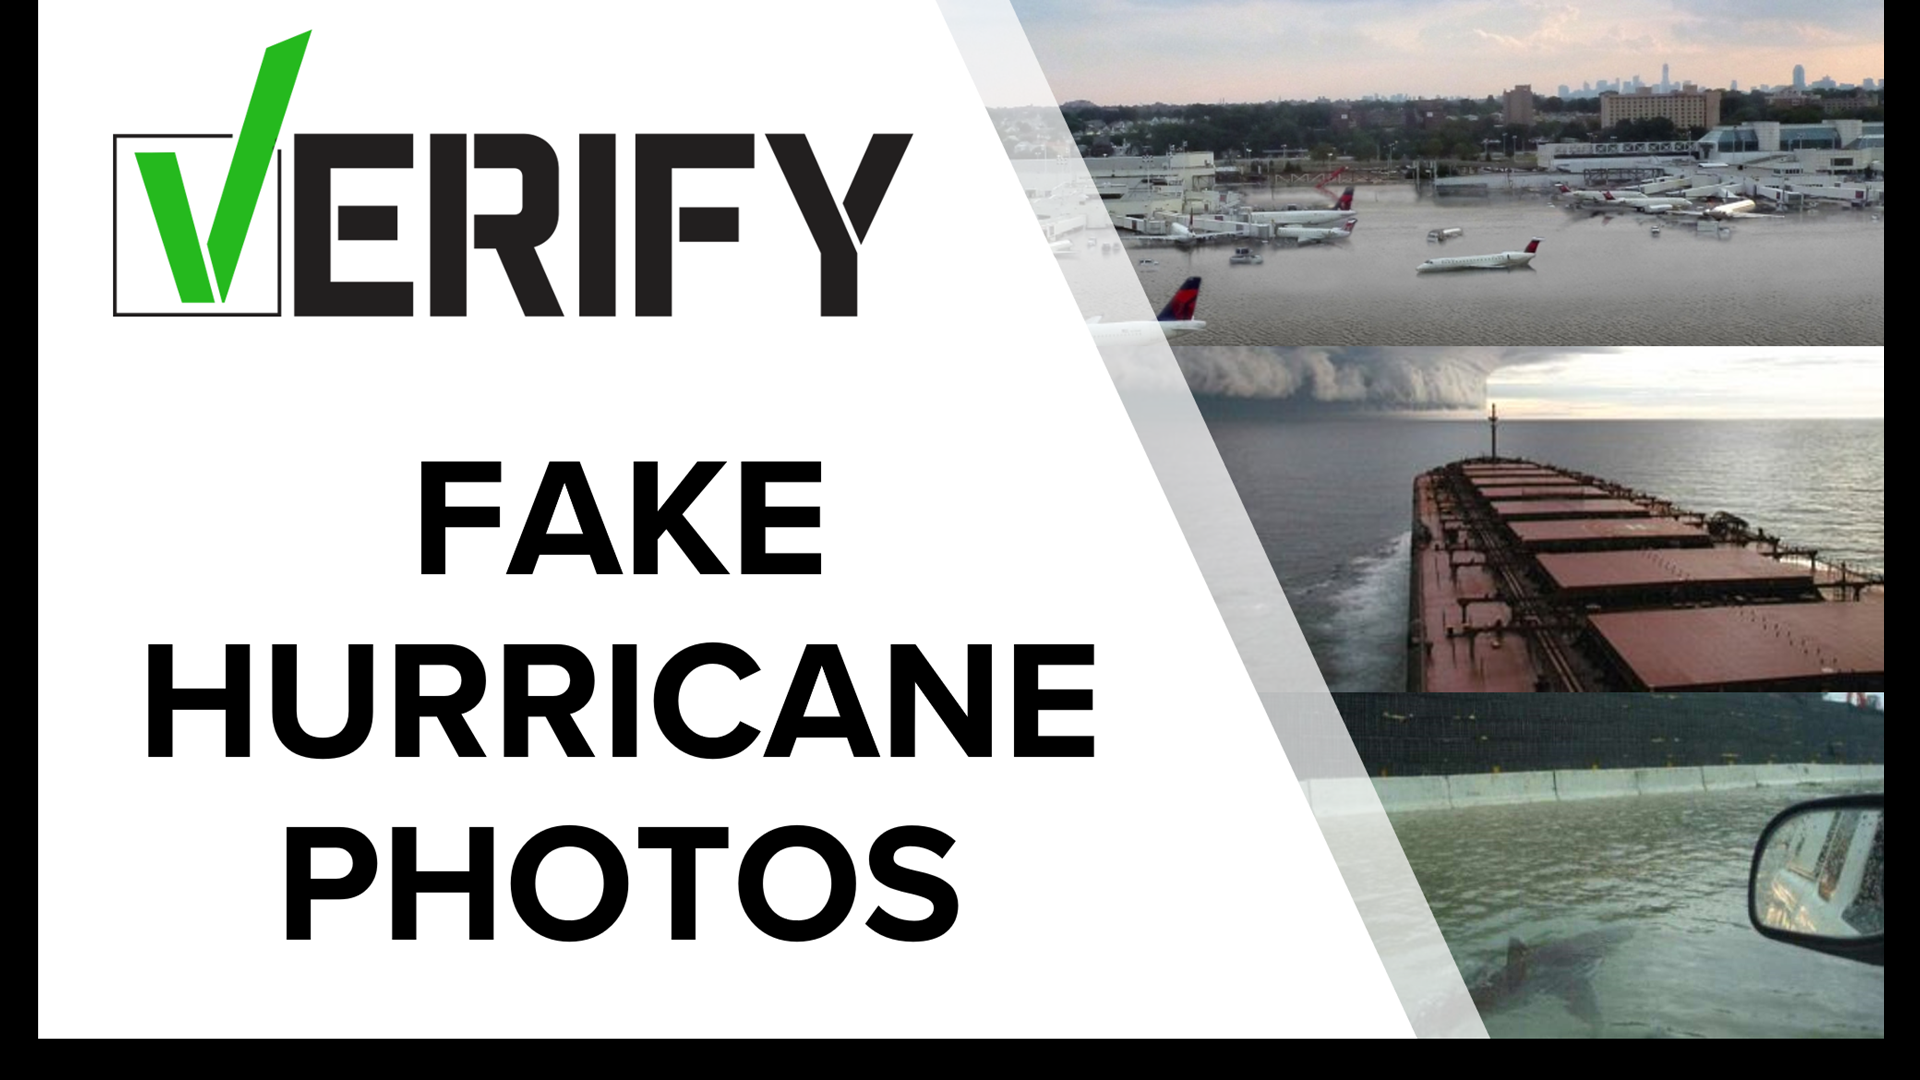 With so many hurricane photos making the rounds online it's hard to know which are real and which are fake. Chris Roger's verifies.